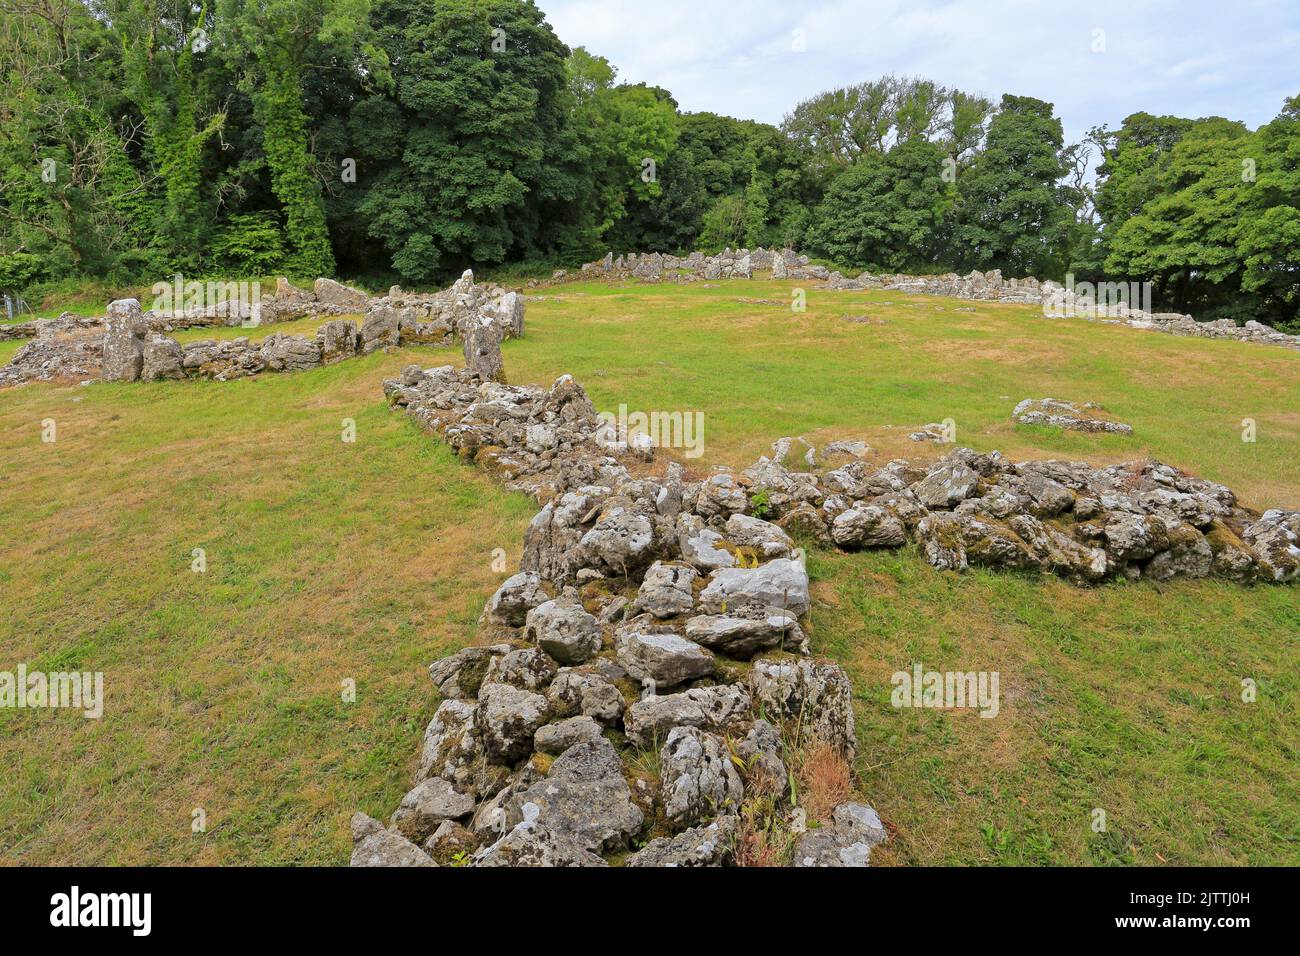 Din Lligwy ancient ruined stone settlement near Moelfre, Isle of Anglesey, Ynys Mon, North Wales, UK. Stock Photo